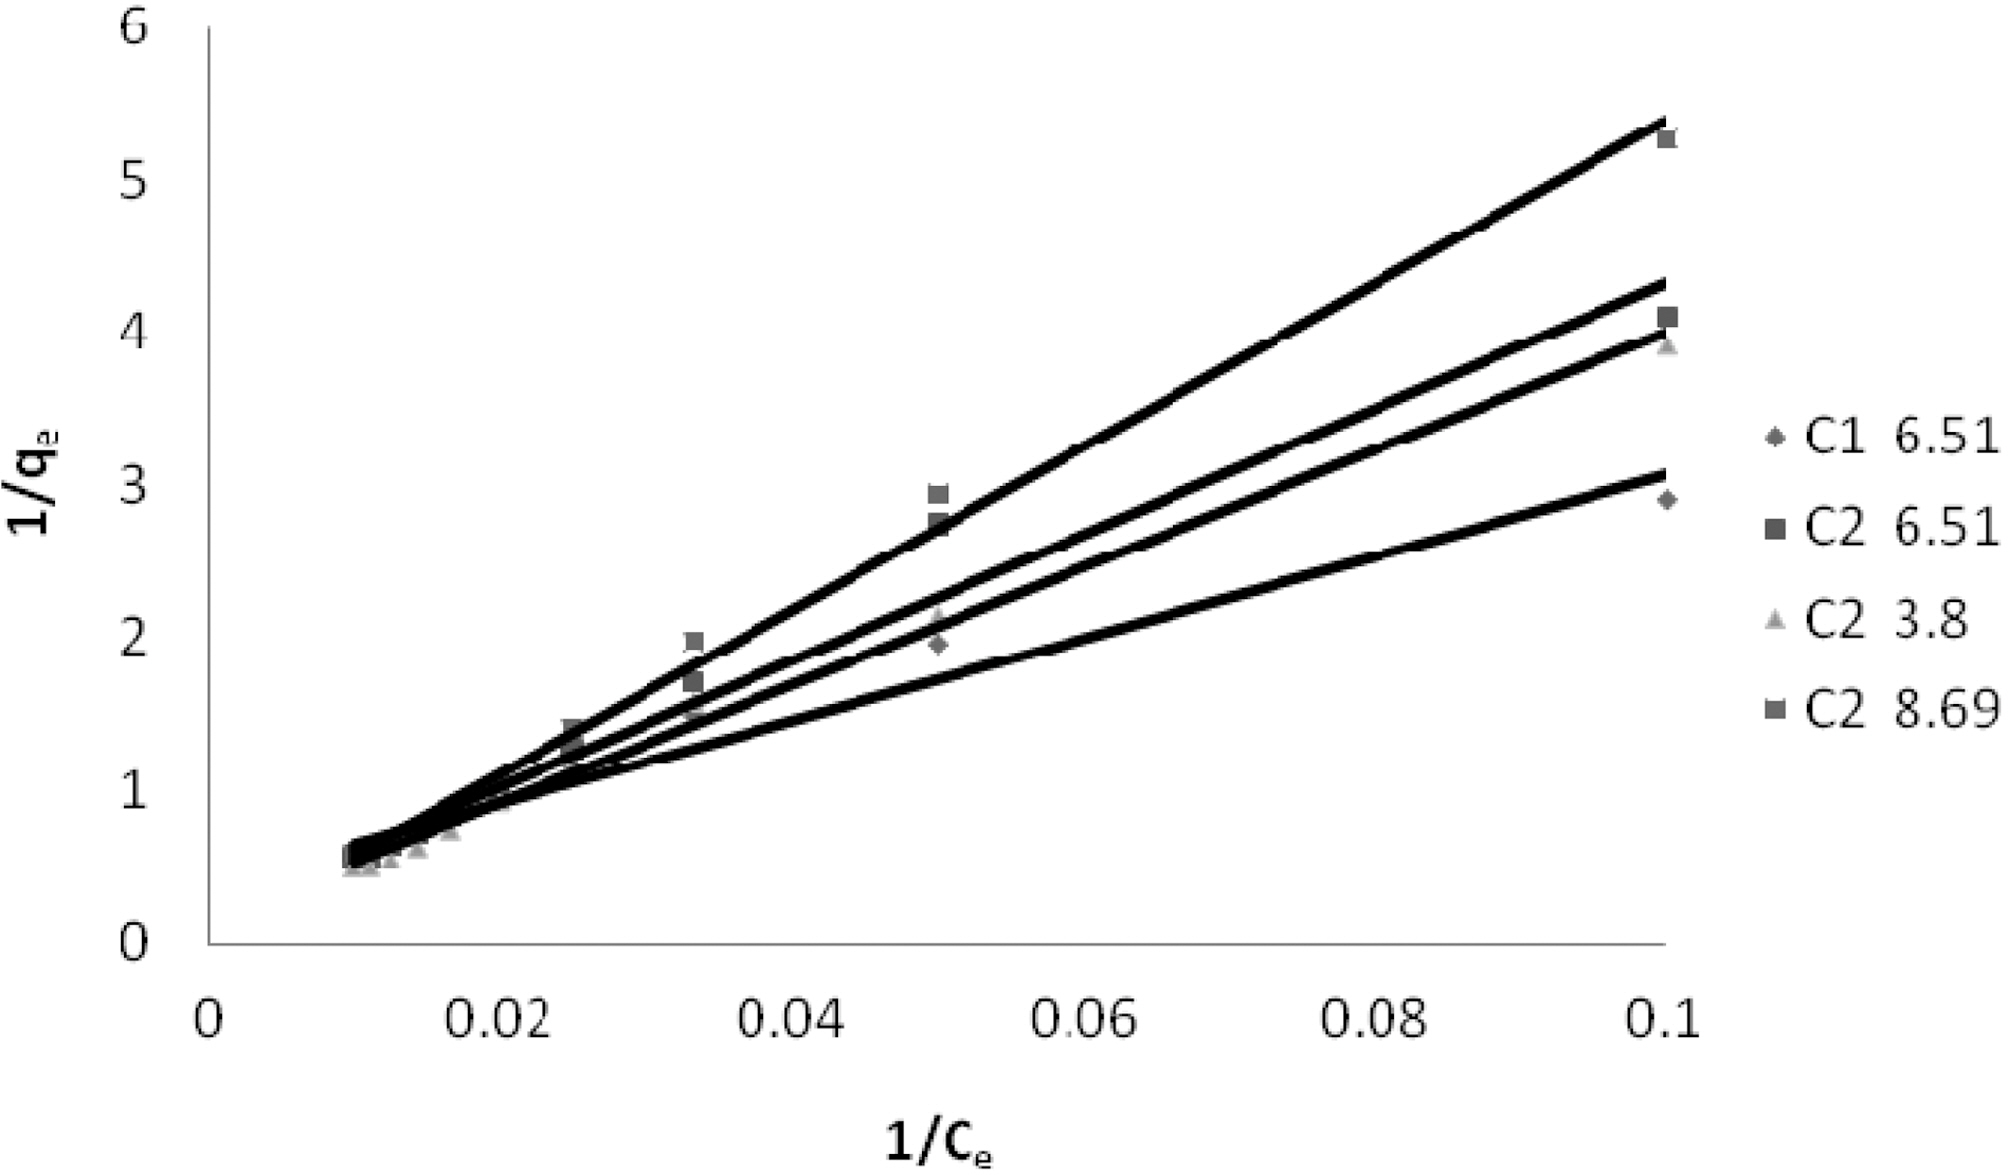 Langmuir Isotherm for dye Acid Blue MTR on C1 & C2 at different pH values.